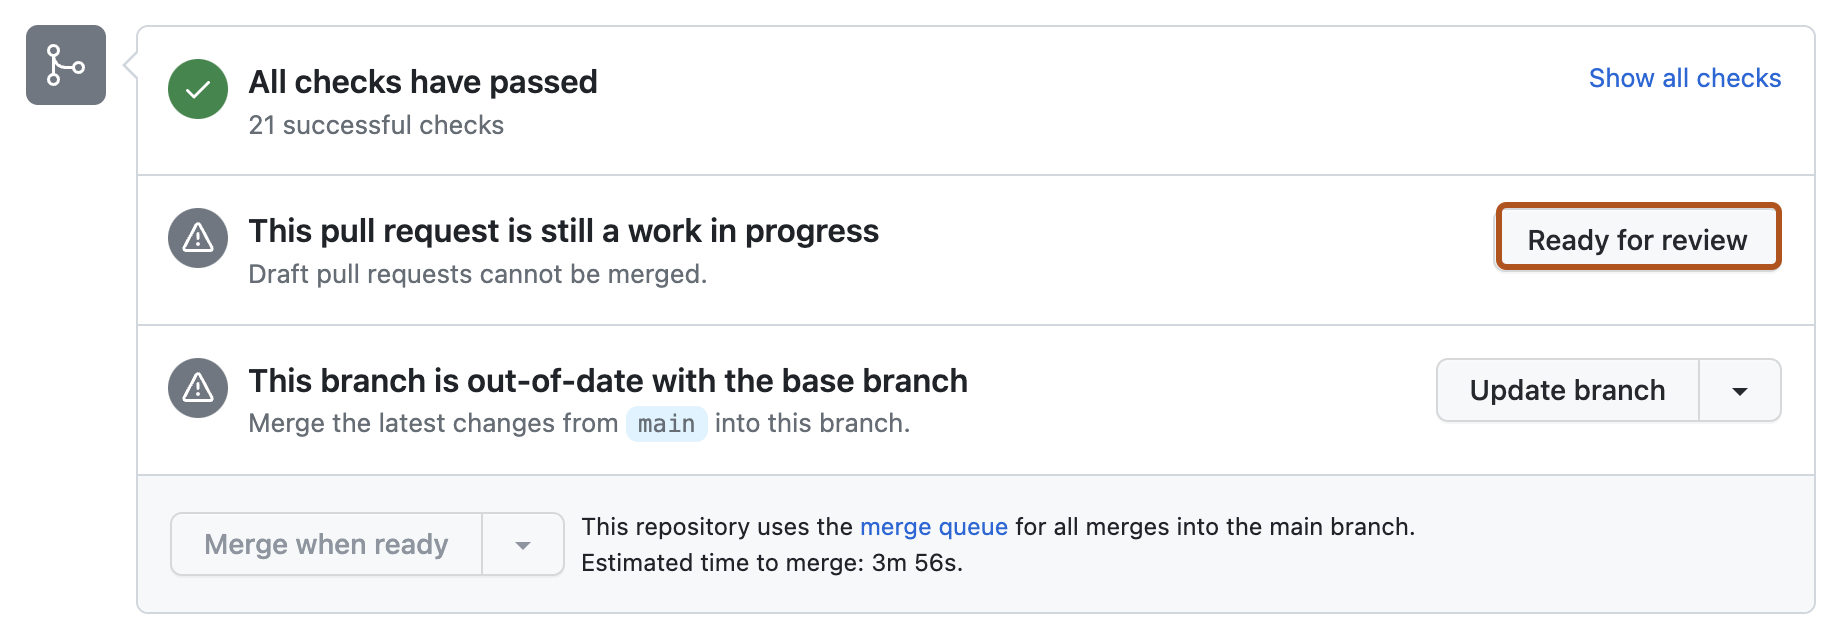 Screenshot of the merge box in a pull request. The "Ready for review" button is outlined in dark orange.